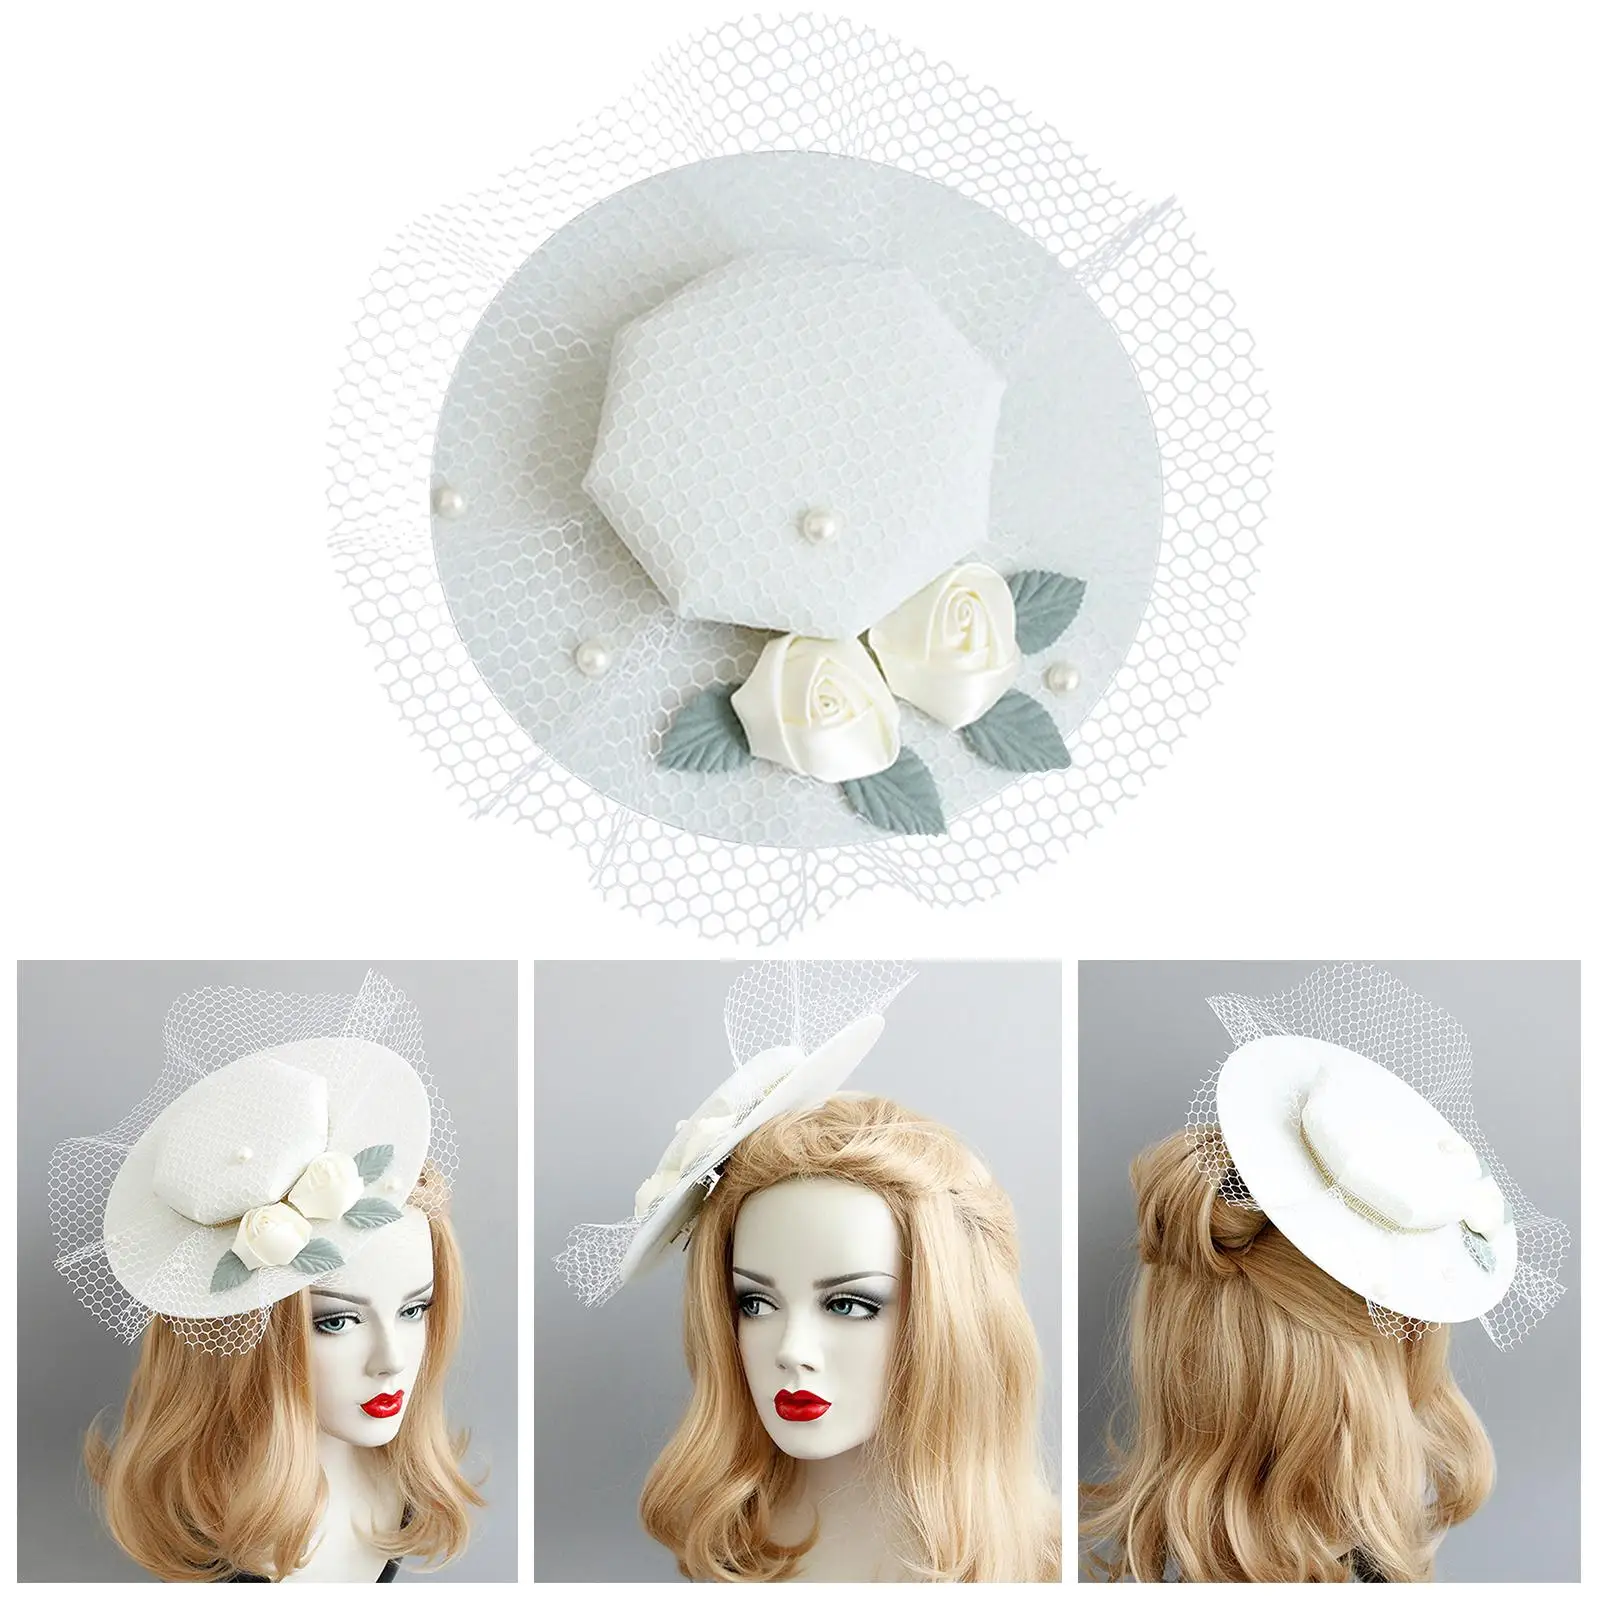 European Court Style Fascinator Top Hat Stylish Fashion Headband for Carnivals Wedding Dress Accessories Cocktail Horse Racing